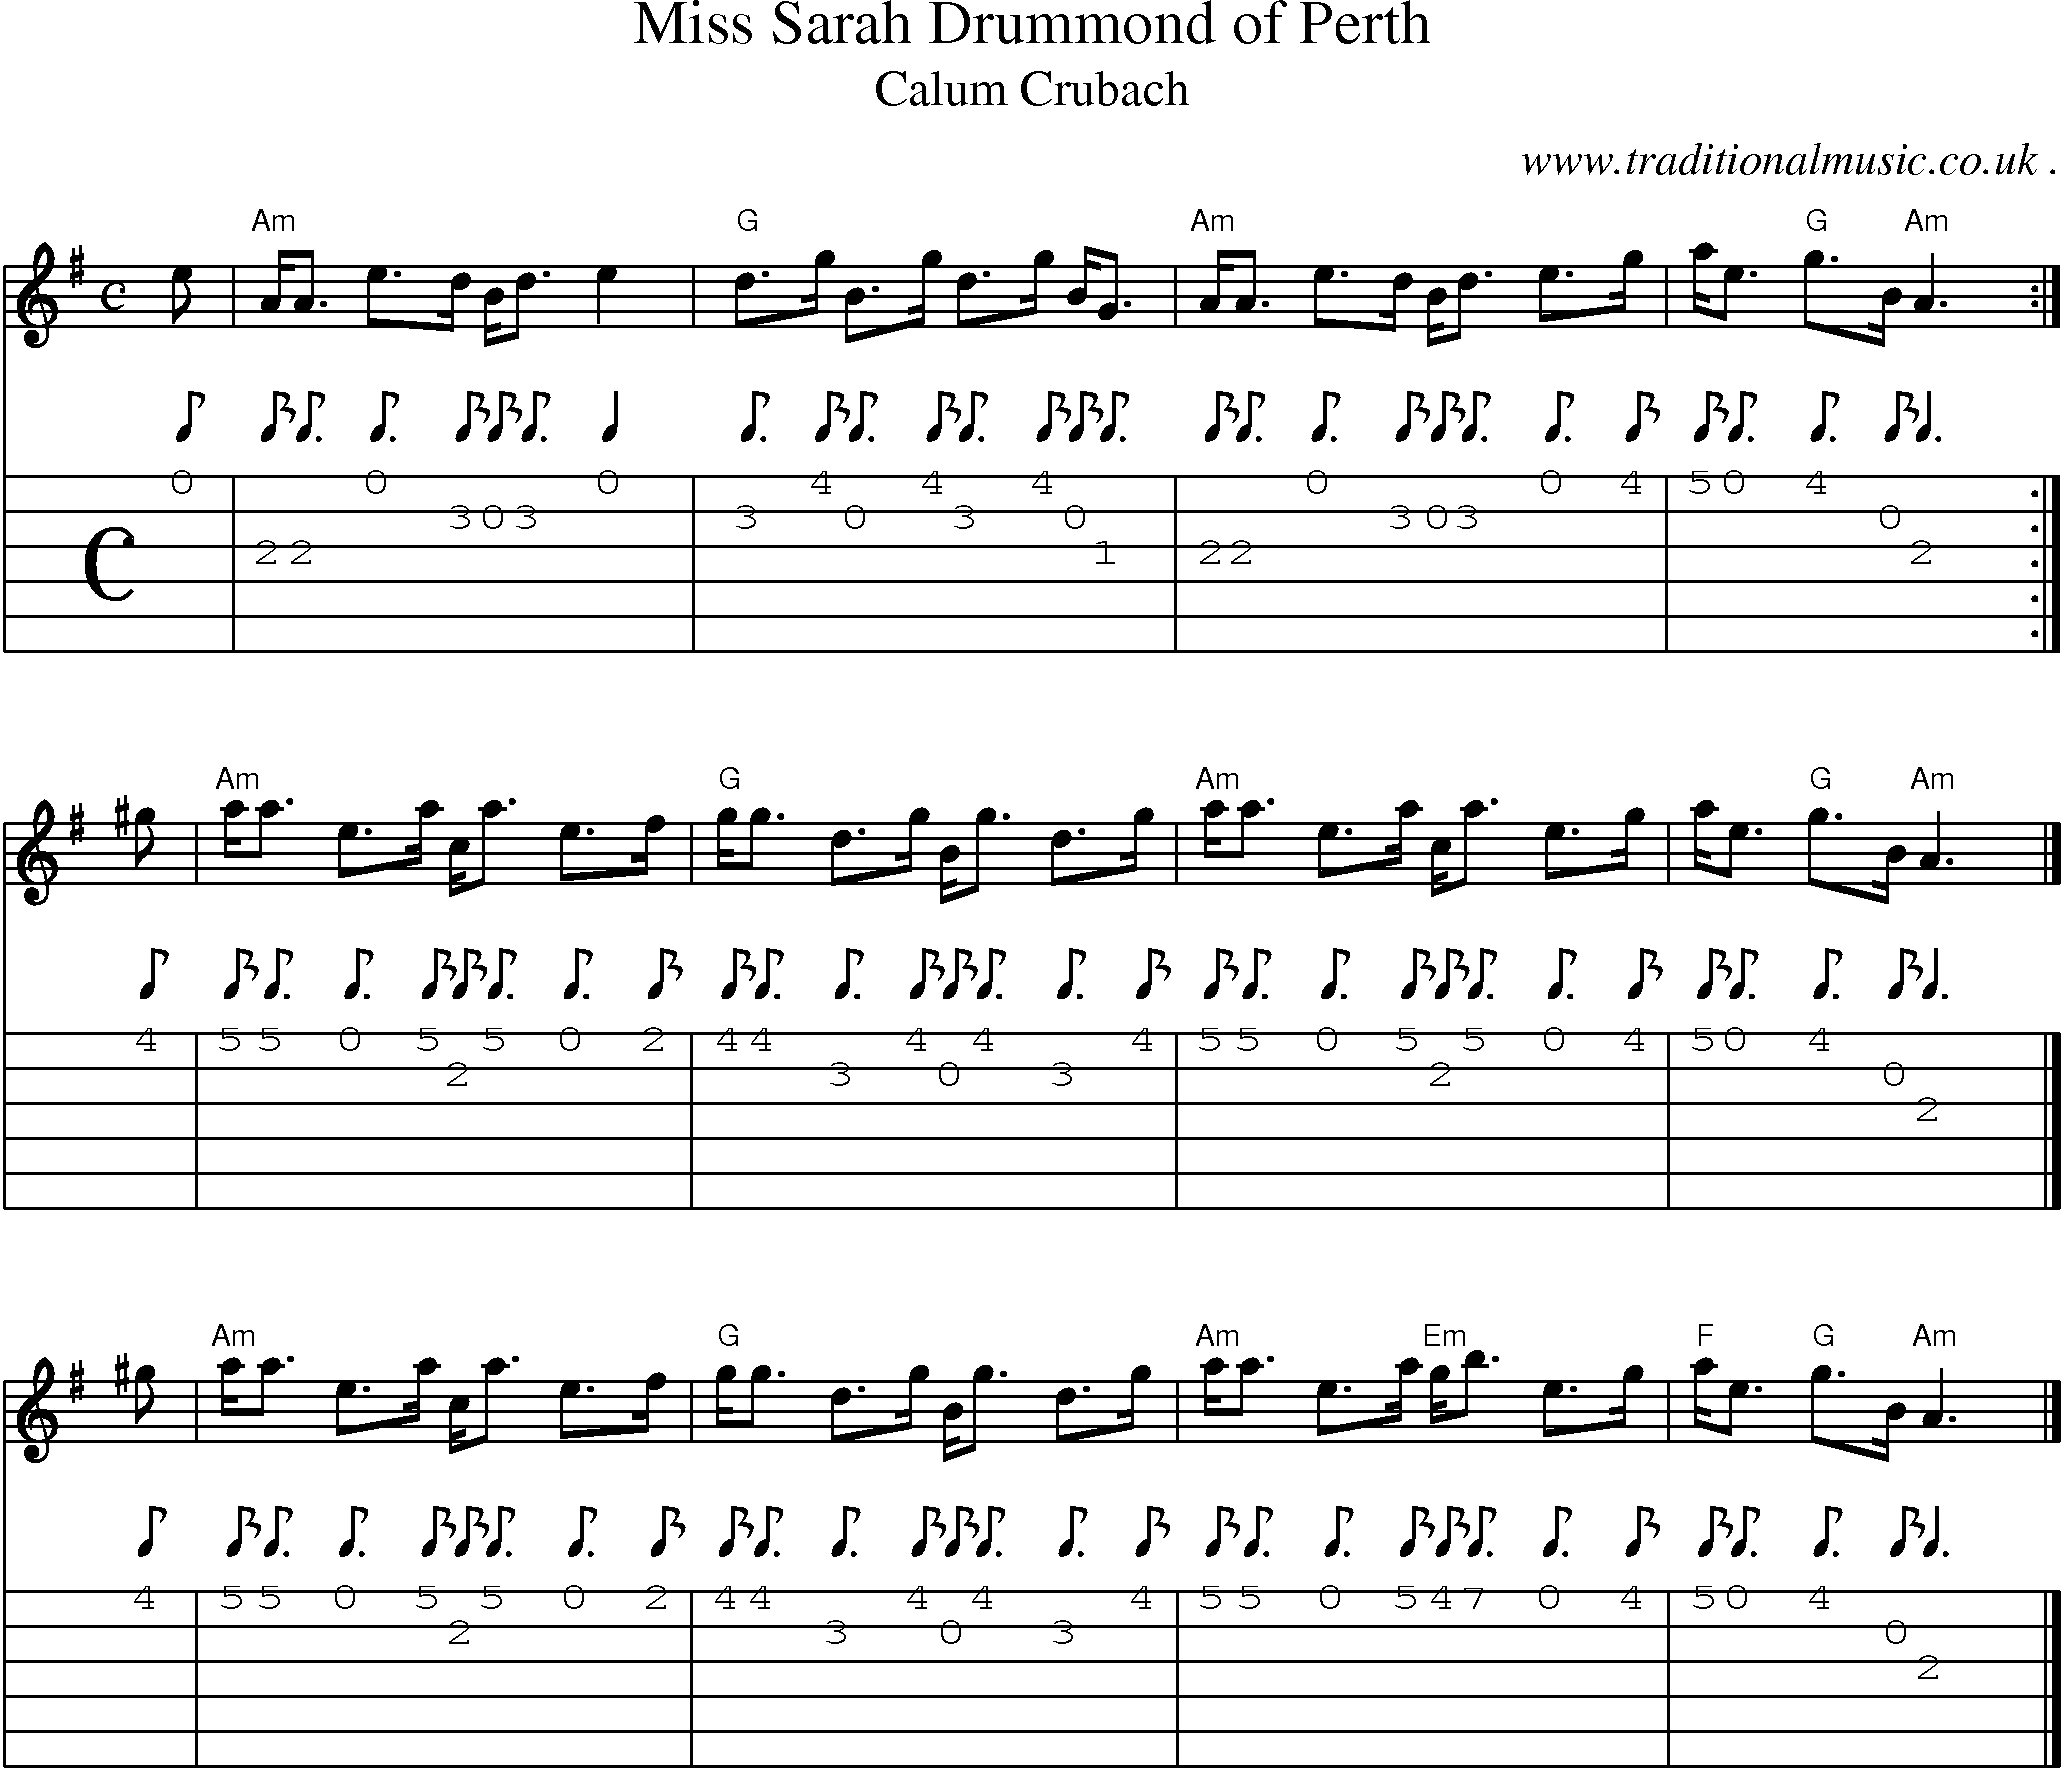 Sheet-music  score, Chords and Guitar Tabs for Miss Sarah Drummond Of Perth